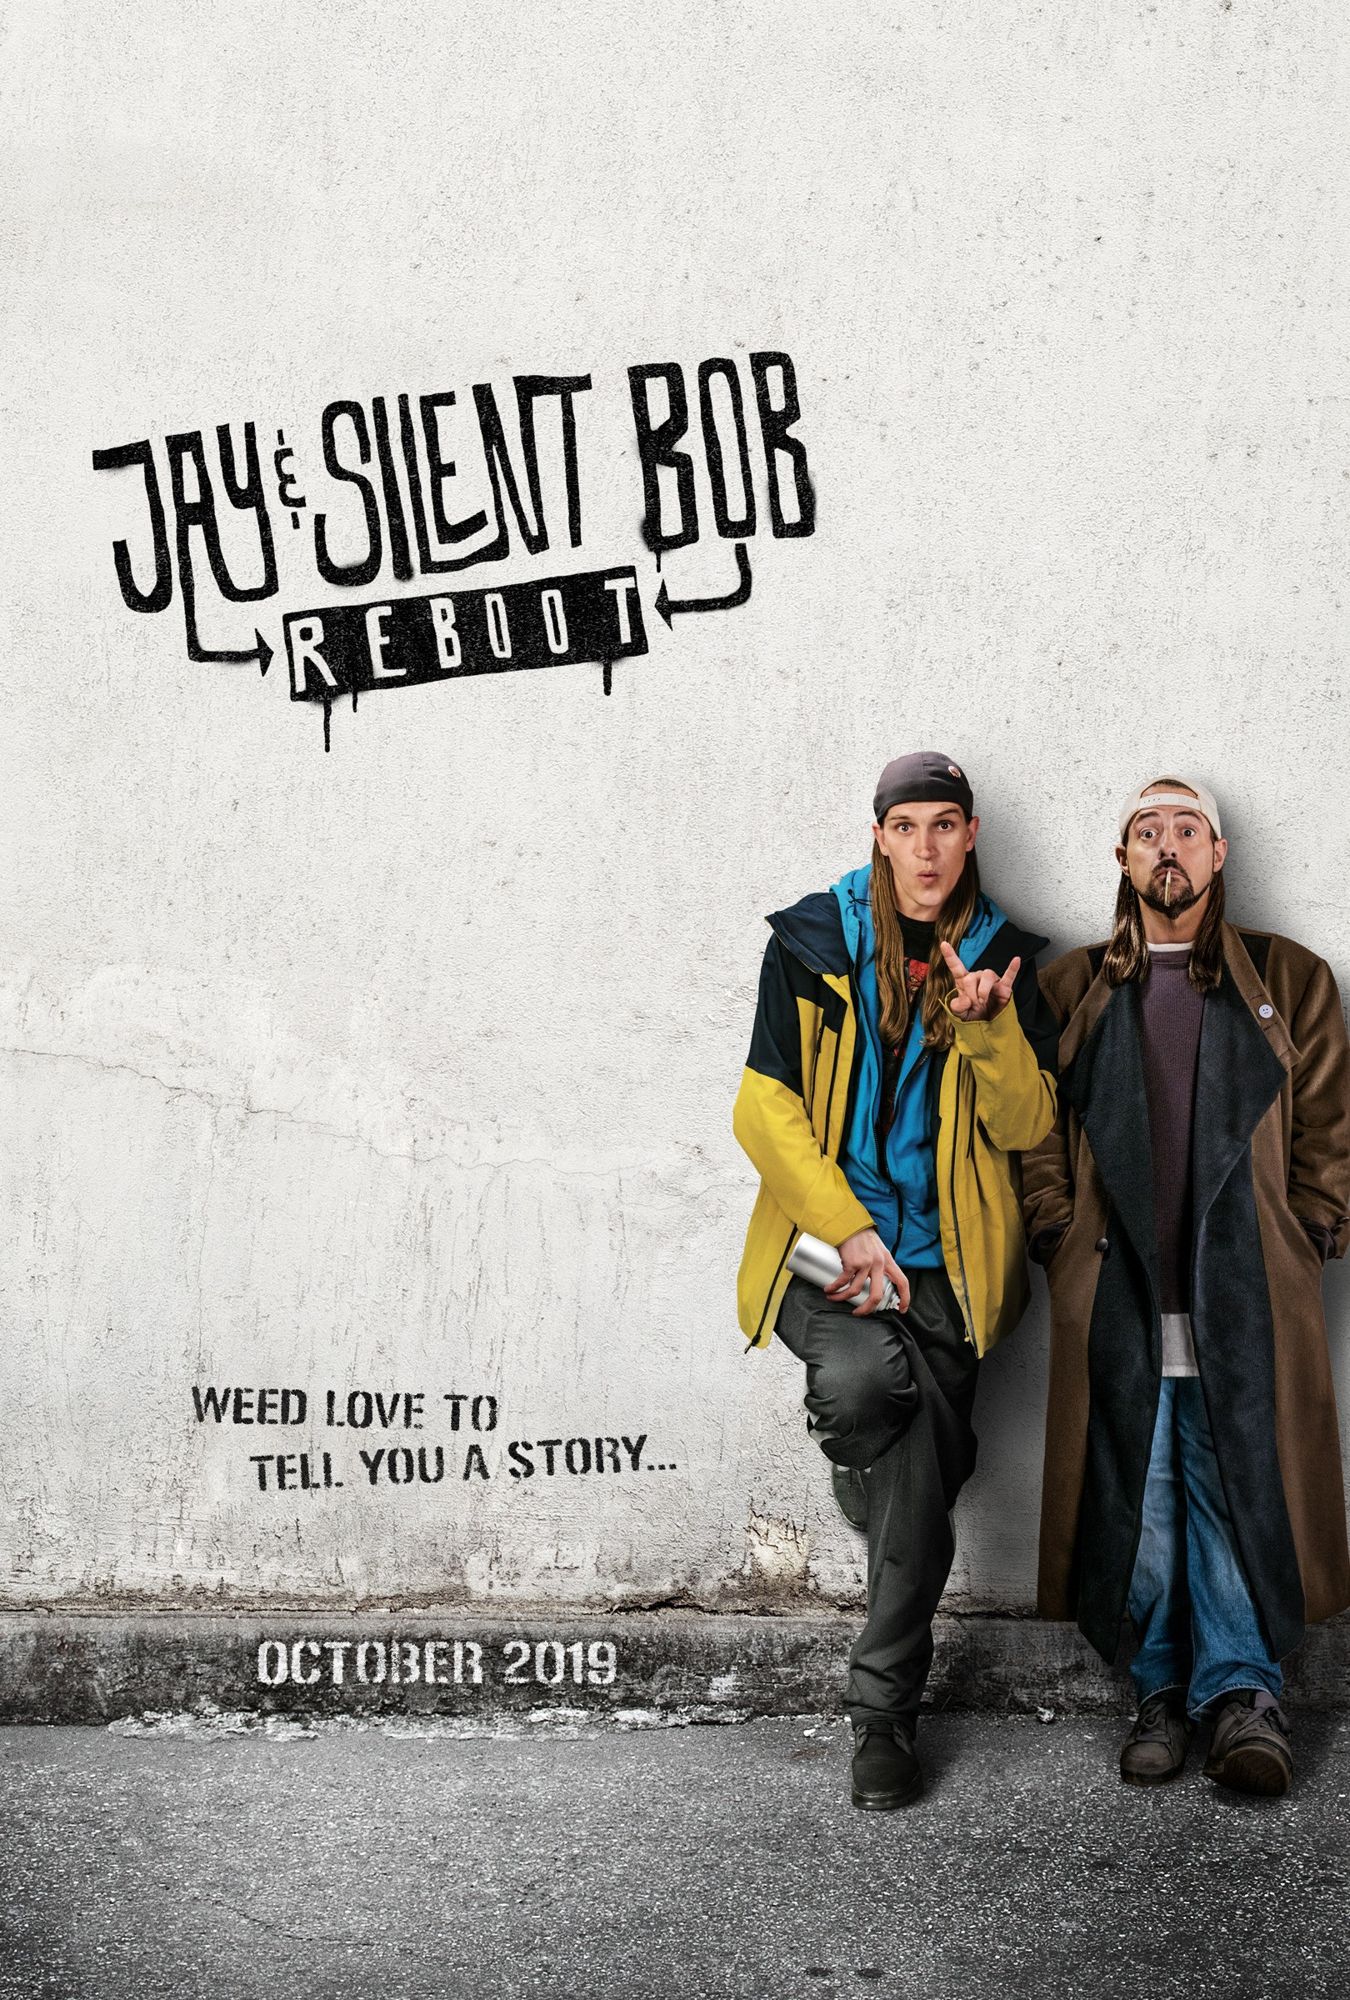 Jay and Silent Bob Reboot (2019) Pictures, Trailer, Reviews, News, DVD and Soundtrack